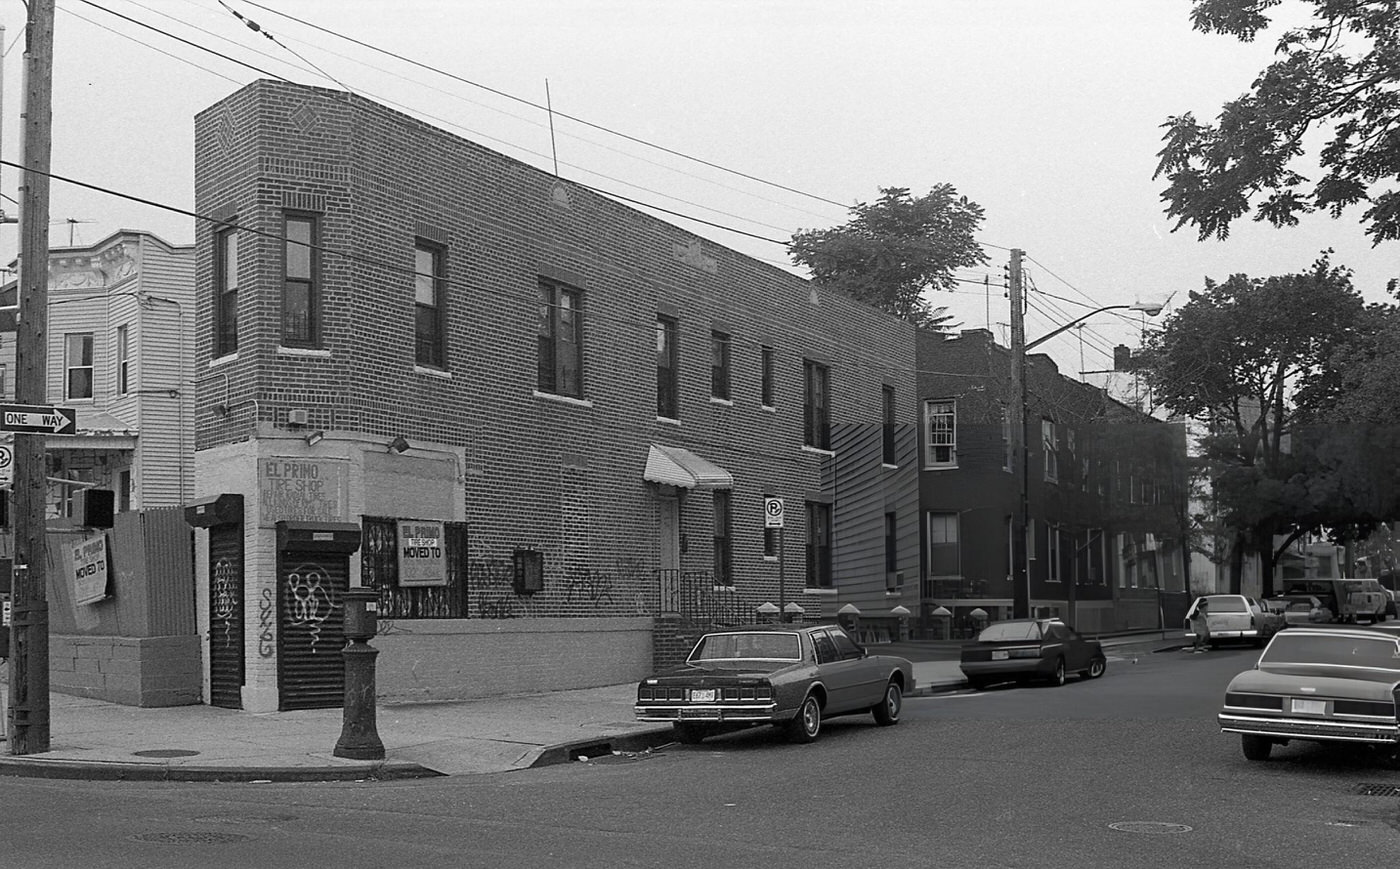 Commercial And Residential Buildings Along Alstyne Avenue And Corona Avenue In Queens' Corona Neighborhood, 1994.